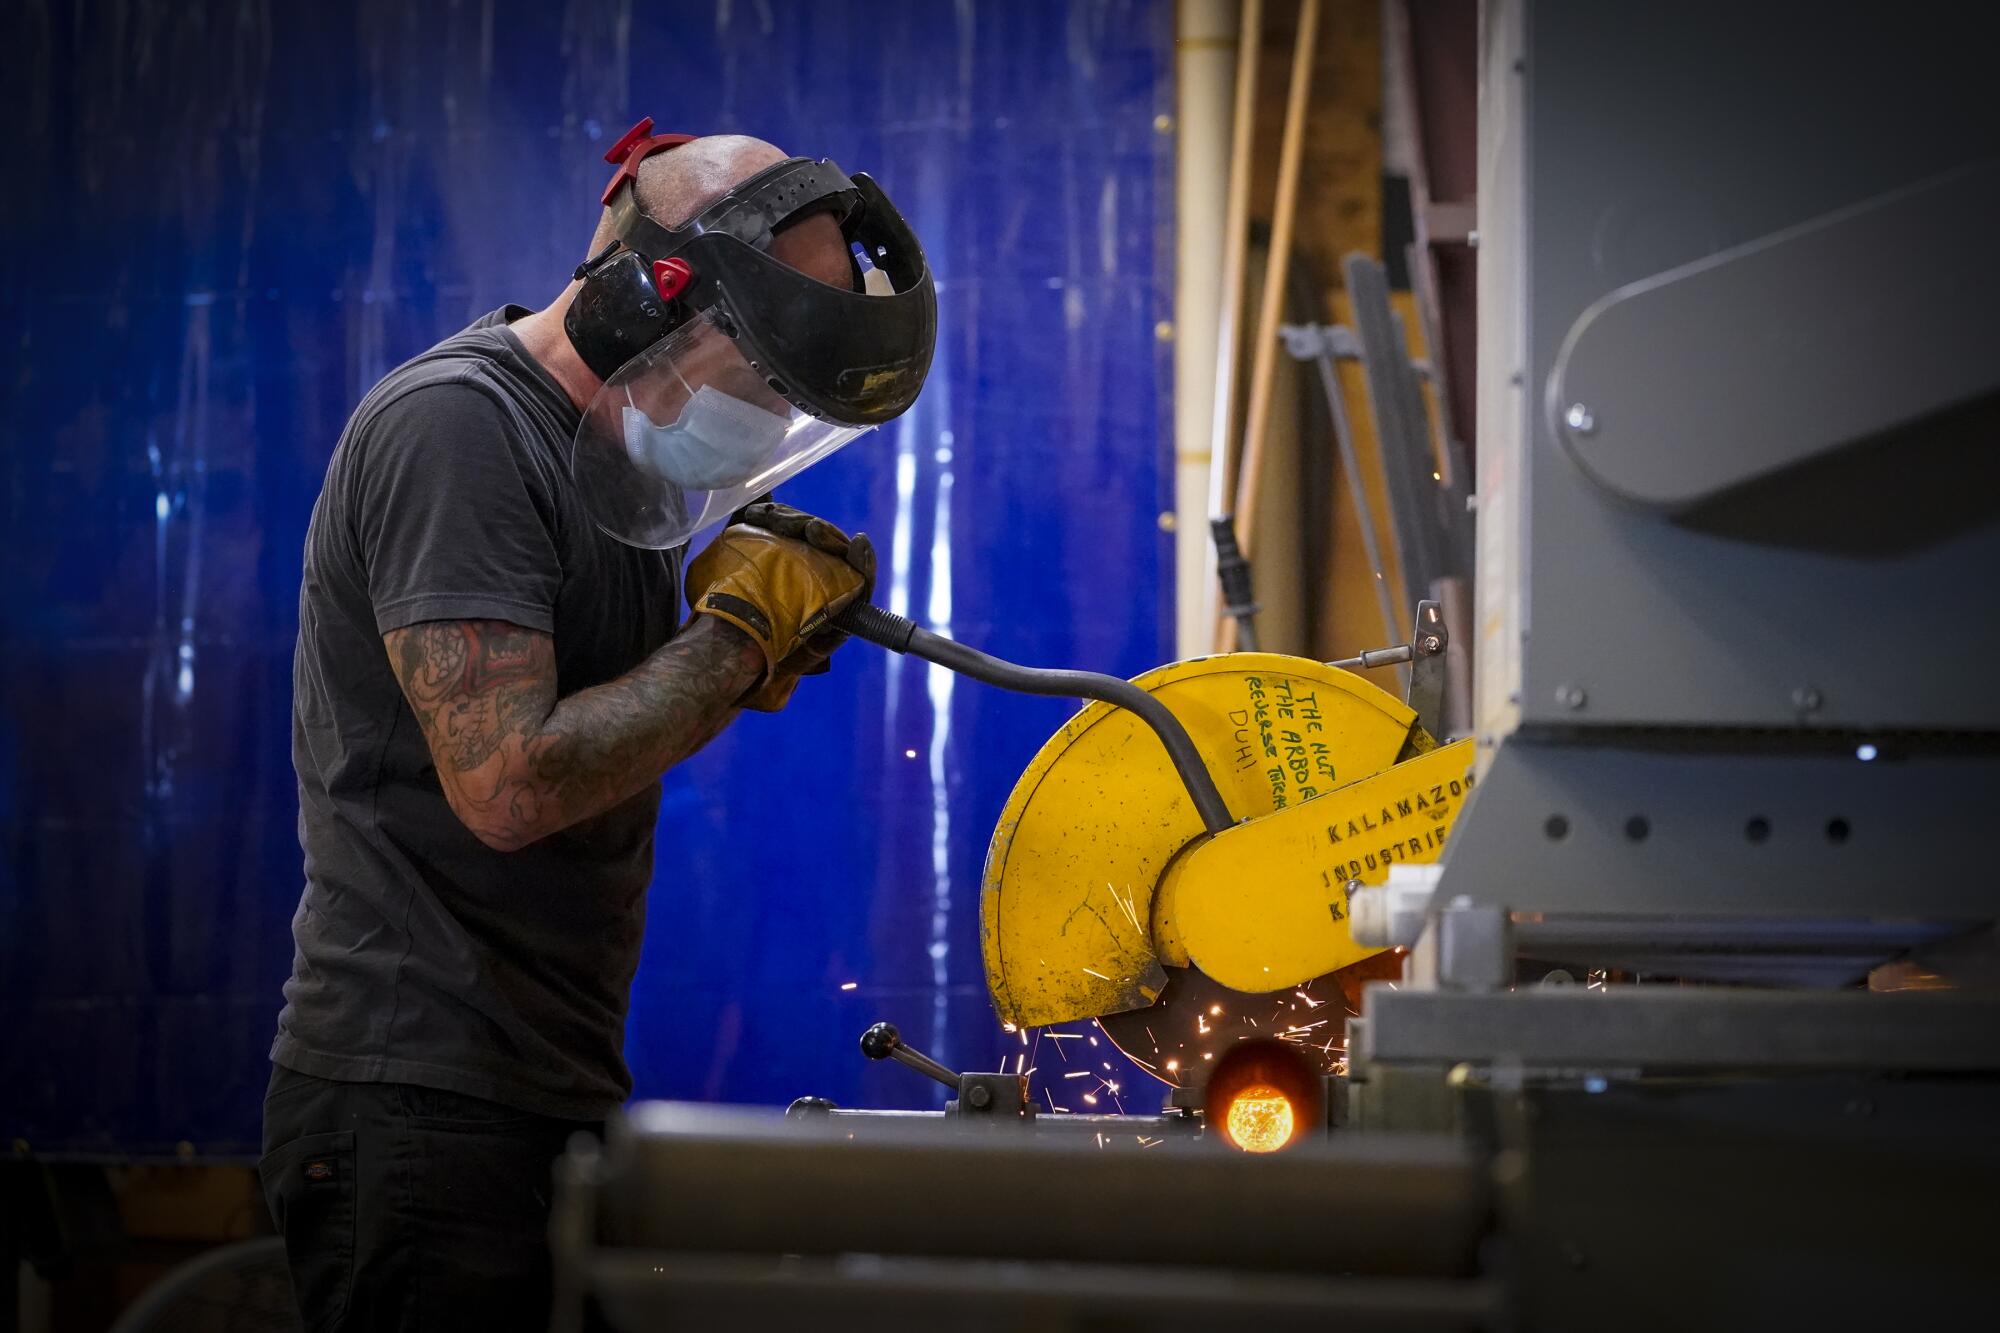 Jason Crutchfield uses a metal cutting saw to cut several pieces of pipes to be used in the fabrication of props.